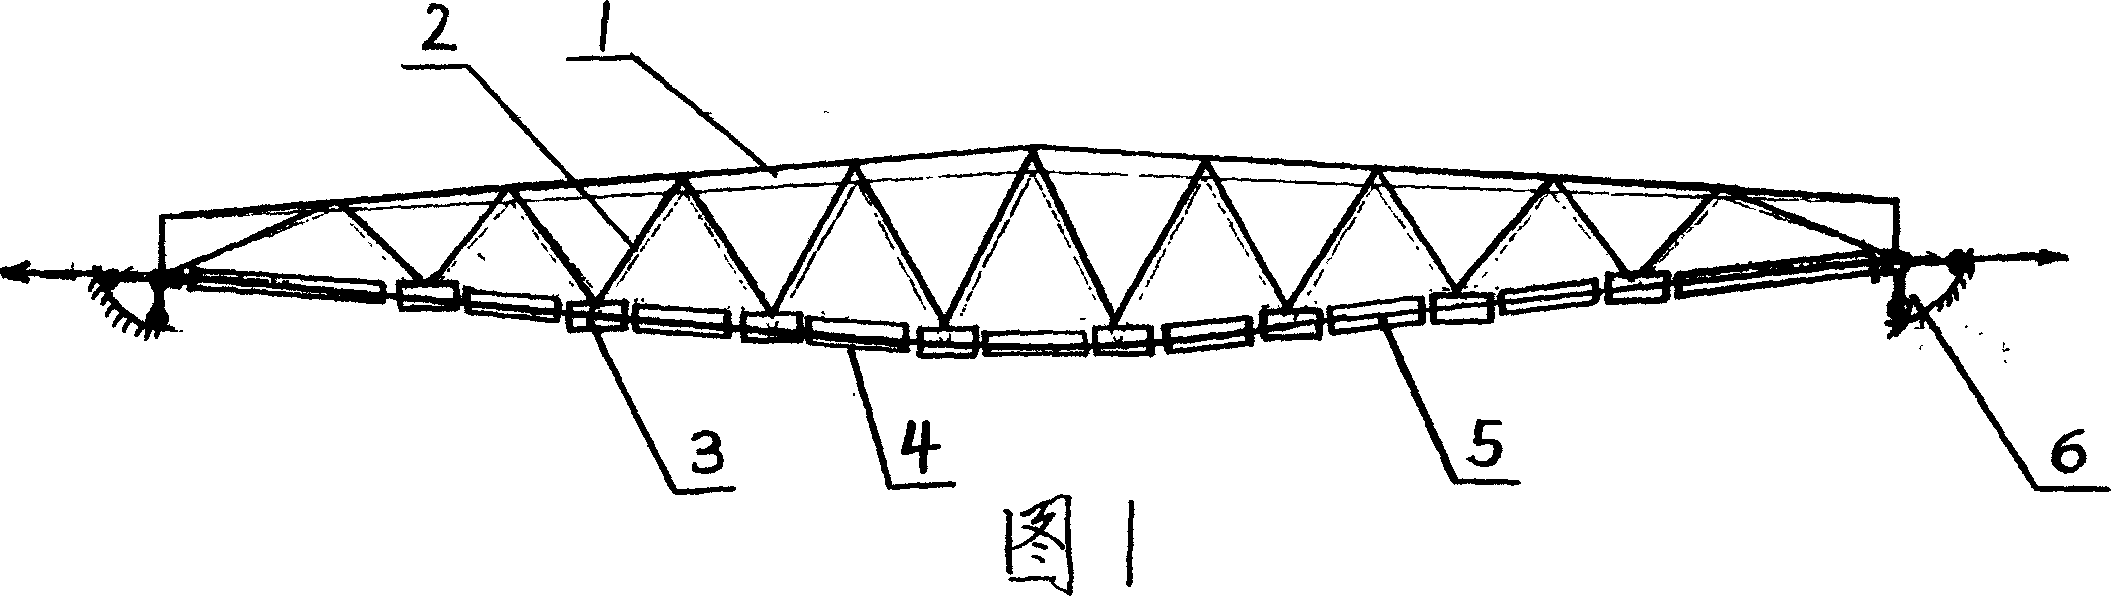 Method for fabricating new type tension chord truss frame in large span